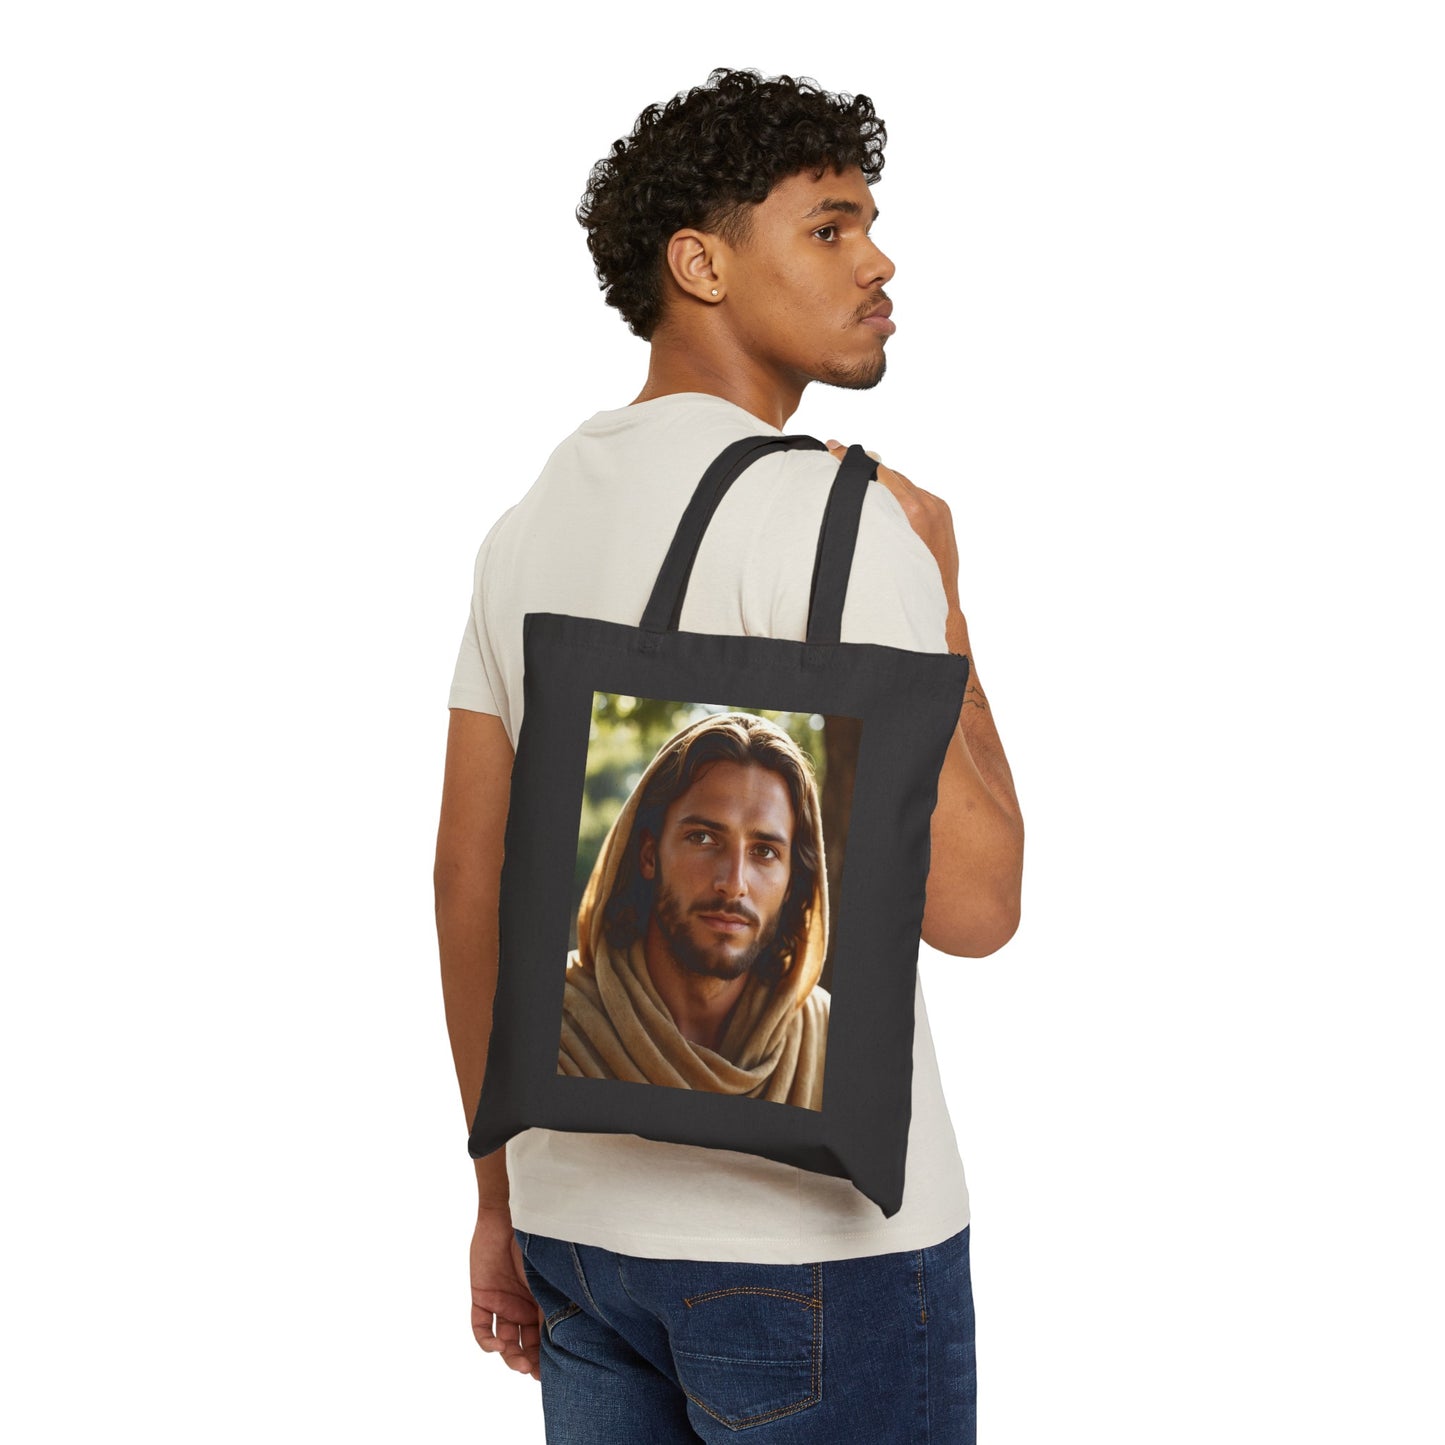 "Who do you say that I am" Black Cotton Canvas Tote Bag